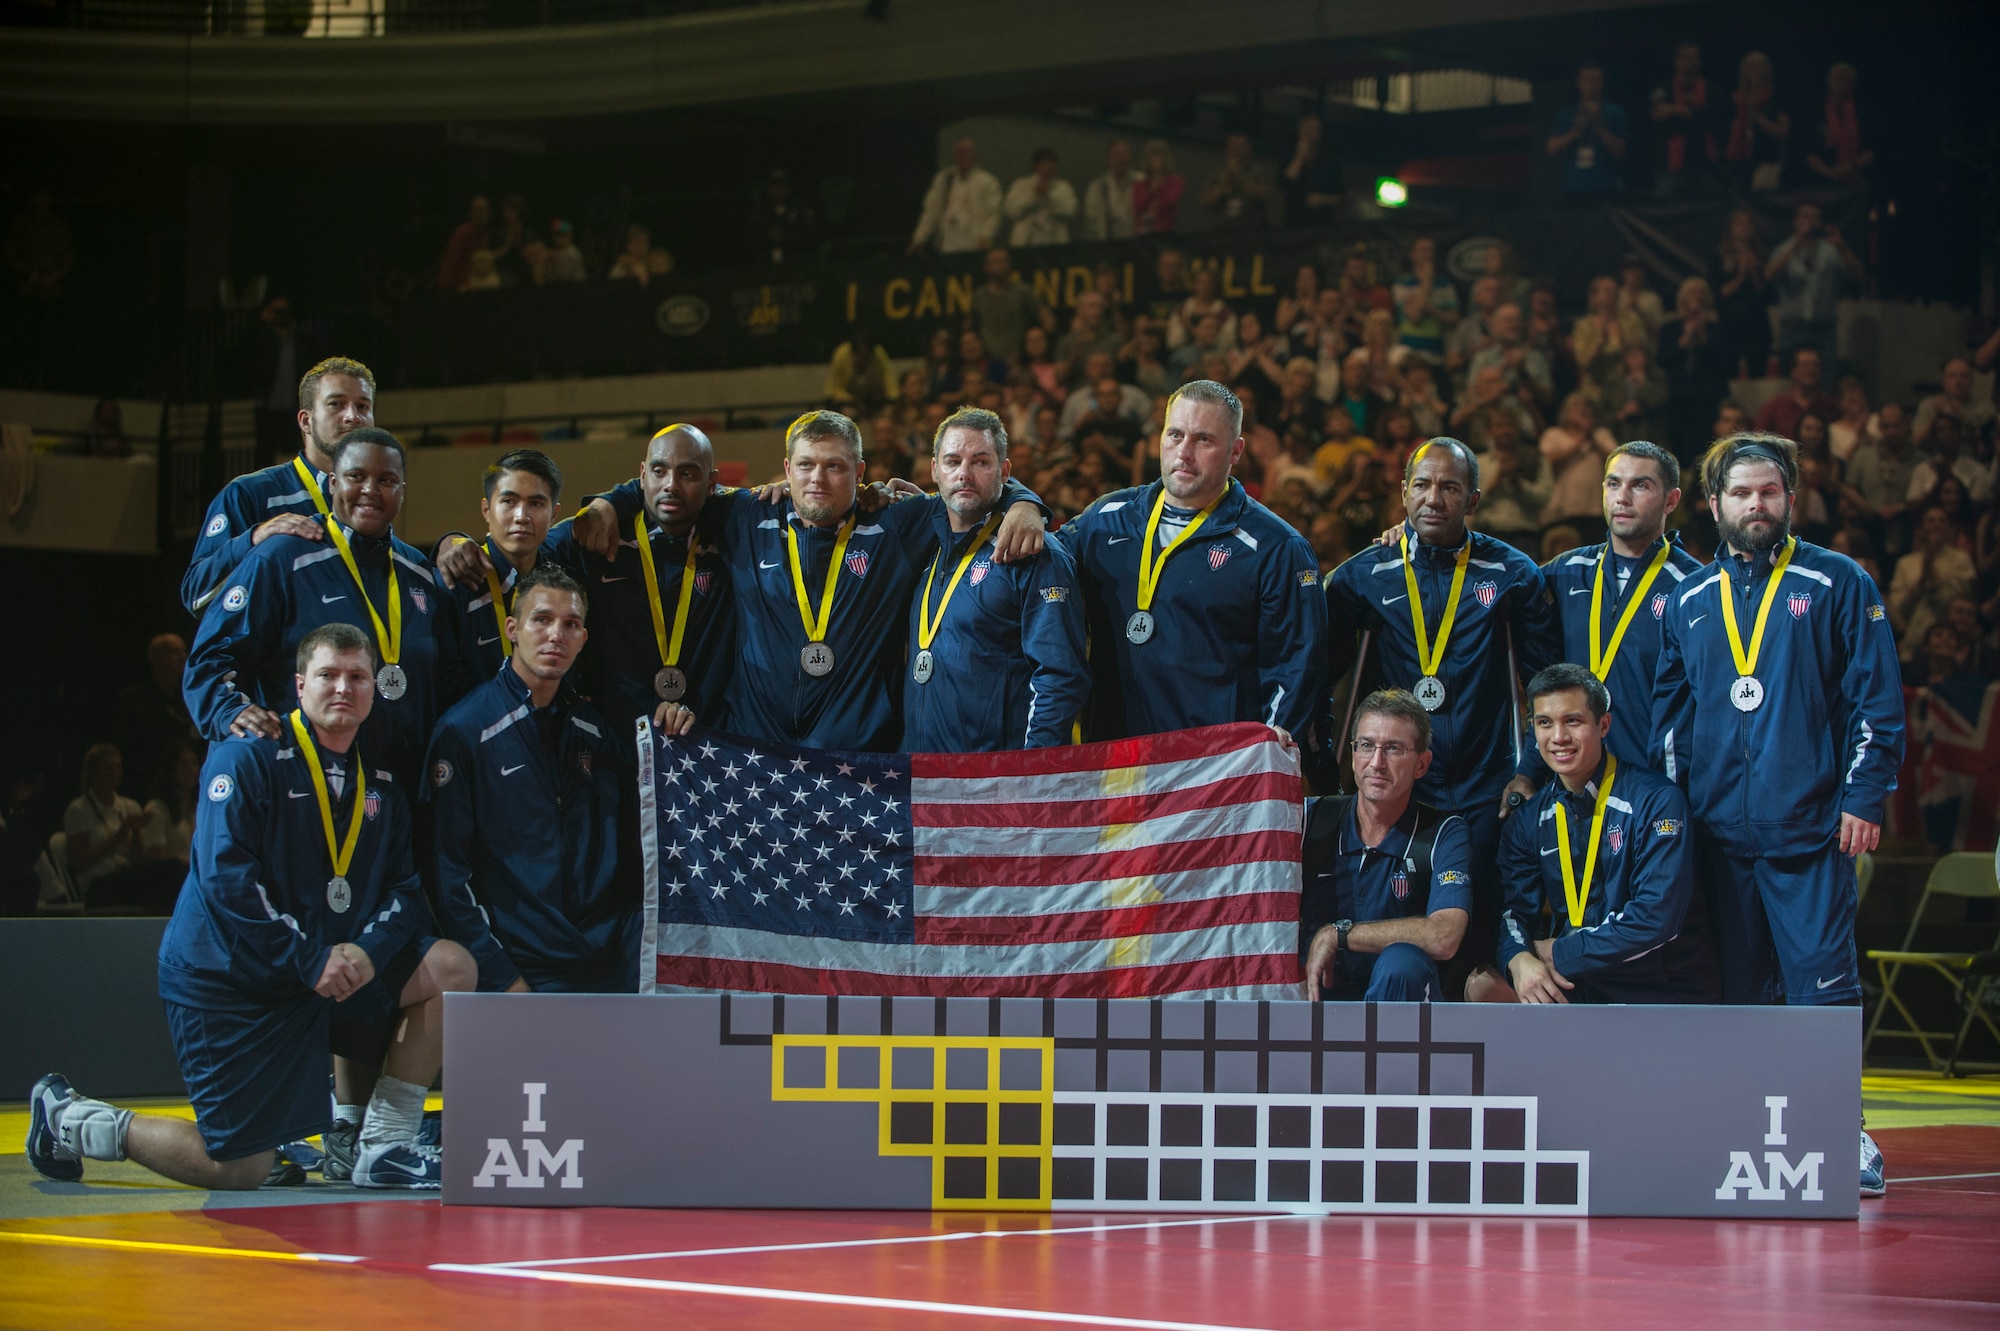 The USA Team poses for a picture as they placed second in the sitting volleyball finals at the Invictus Games Sept. 14, 2014, in London. Great Britain defeated the U.S. in a best-out-of-five match. The Invictus Games featured athletes competing in various Paralympic-style events, including swimming, track and field, seated volleyball, wheelchair basketball, and wheelchair rugby, among others. (U.S. Navy photo/Mass Communication Specialist 1st Class (SW) Mark Logico)